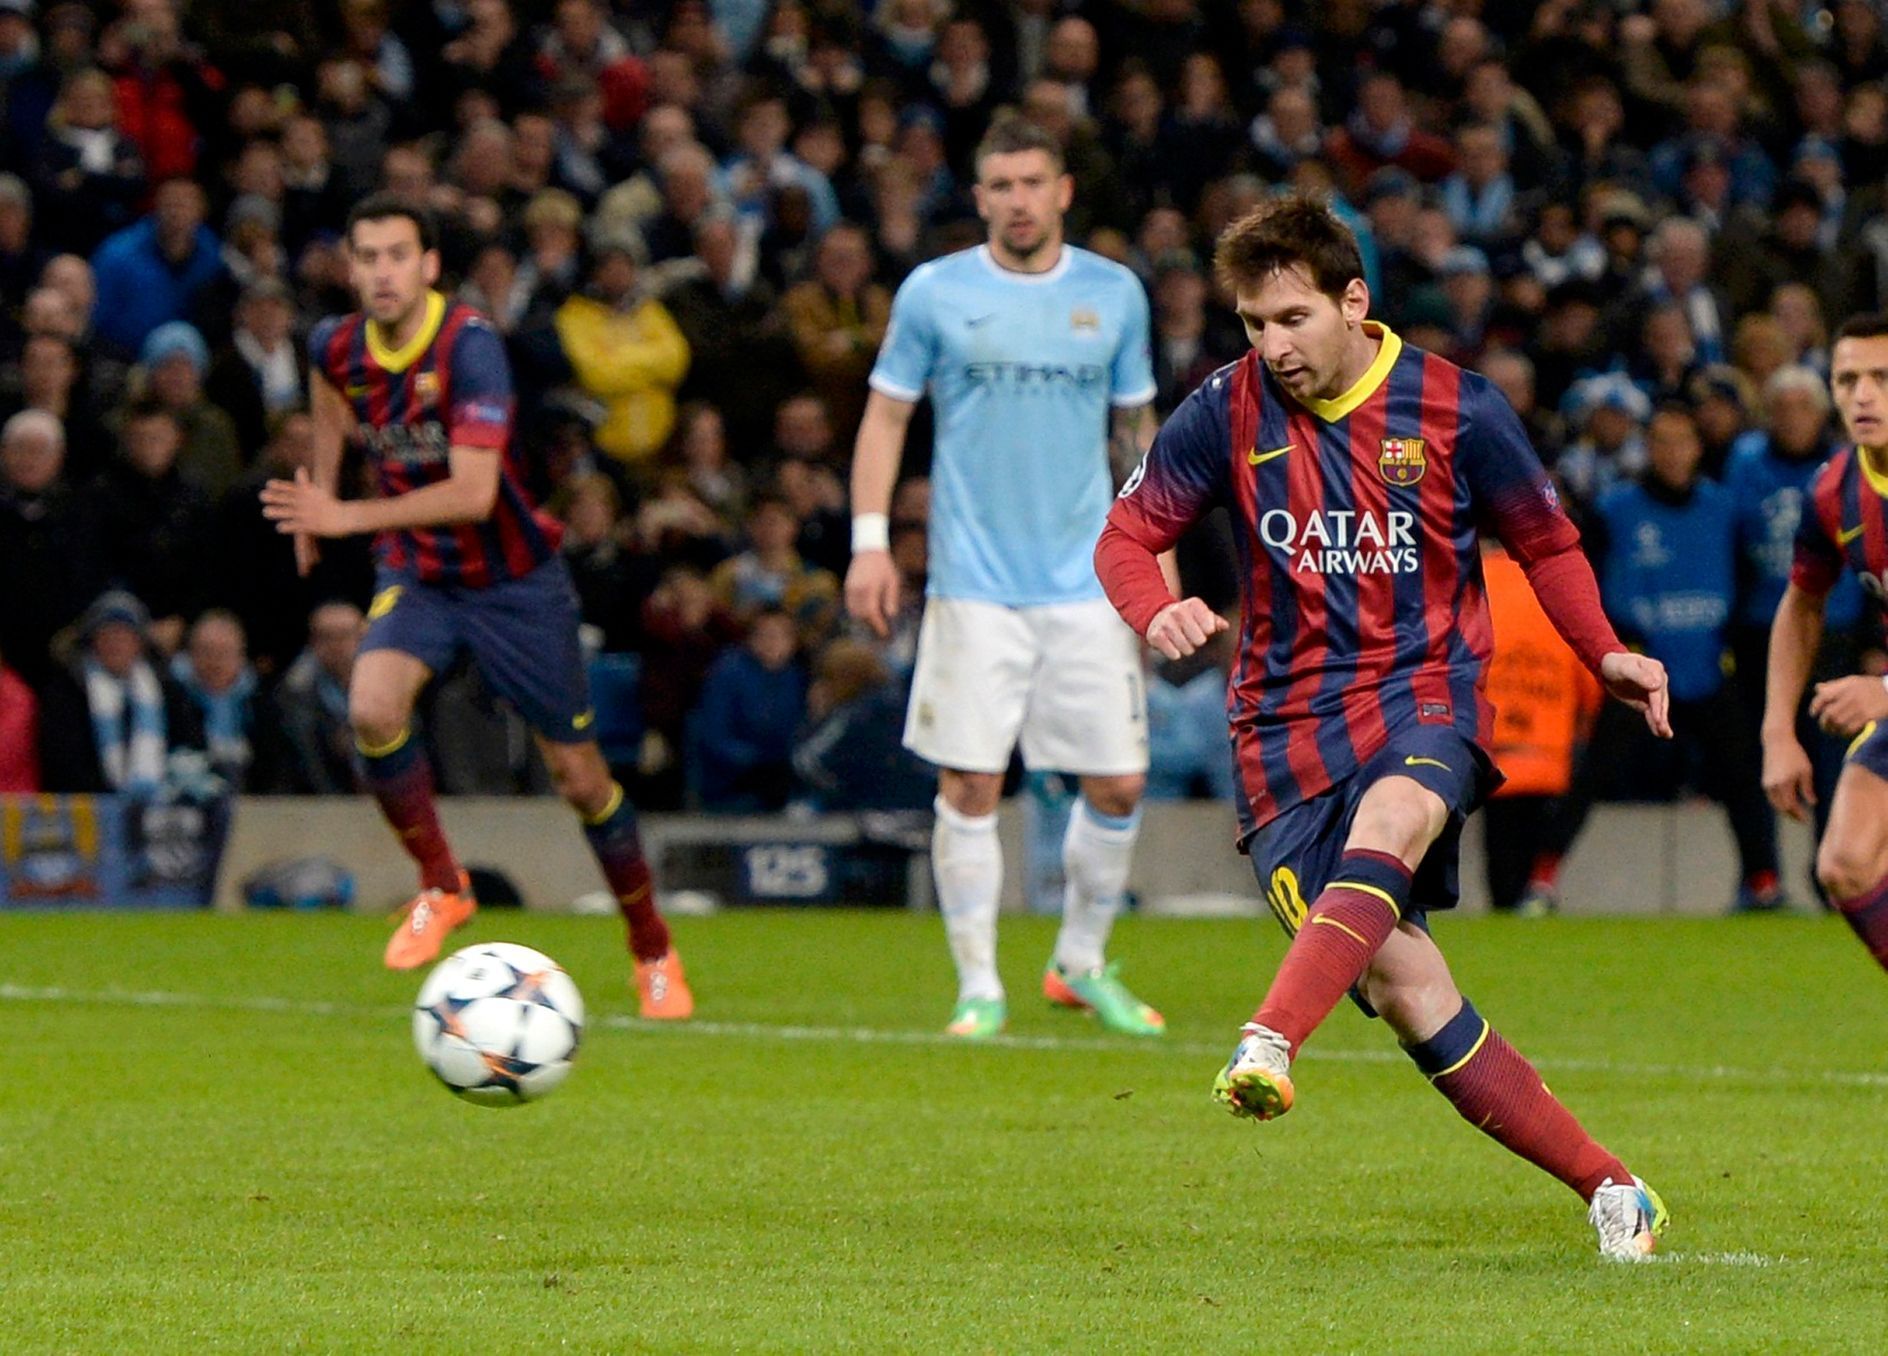 Barcelona's Lionel Messi scores a penalty against Manchester City during their Champions League round of 16 first leg soccer match at the Etihad Stadium in Manchester